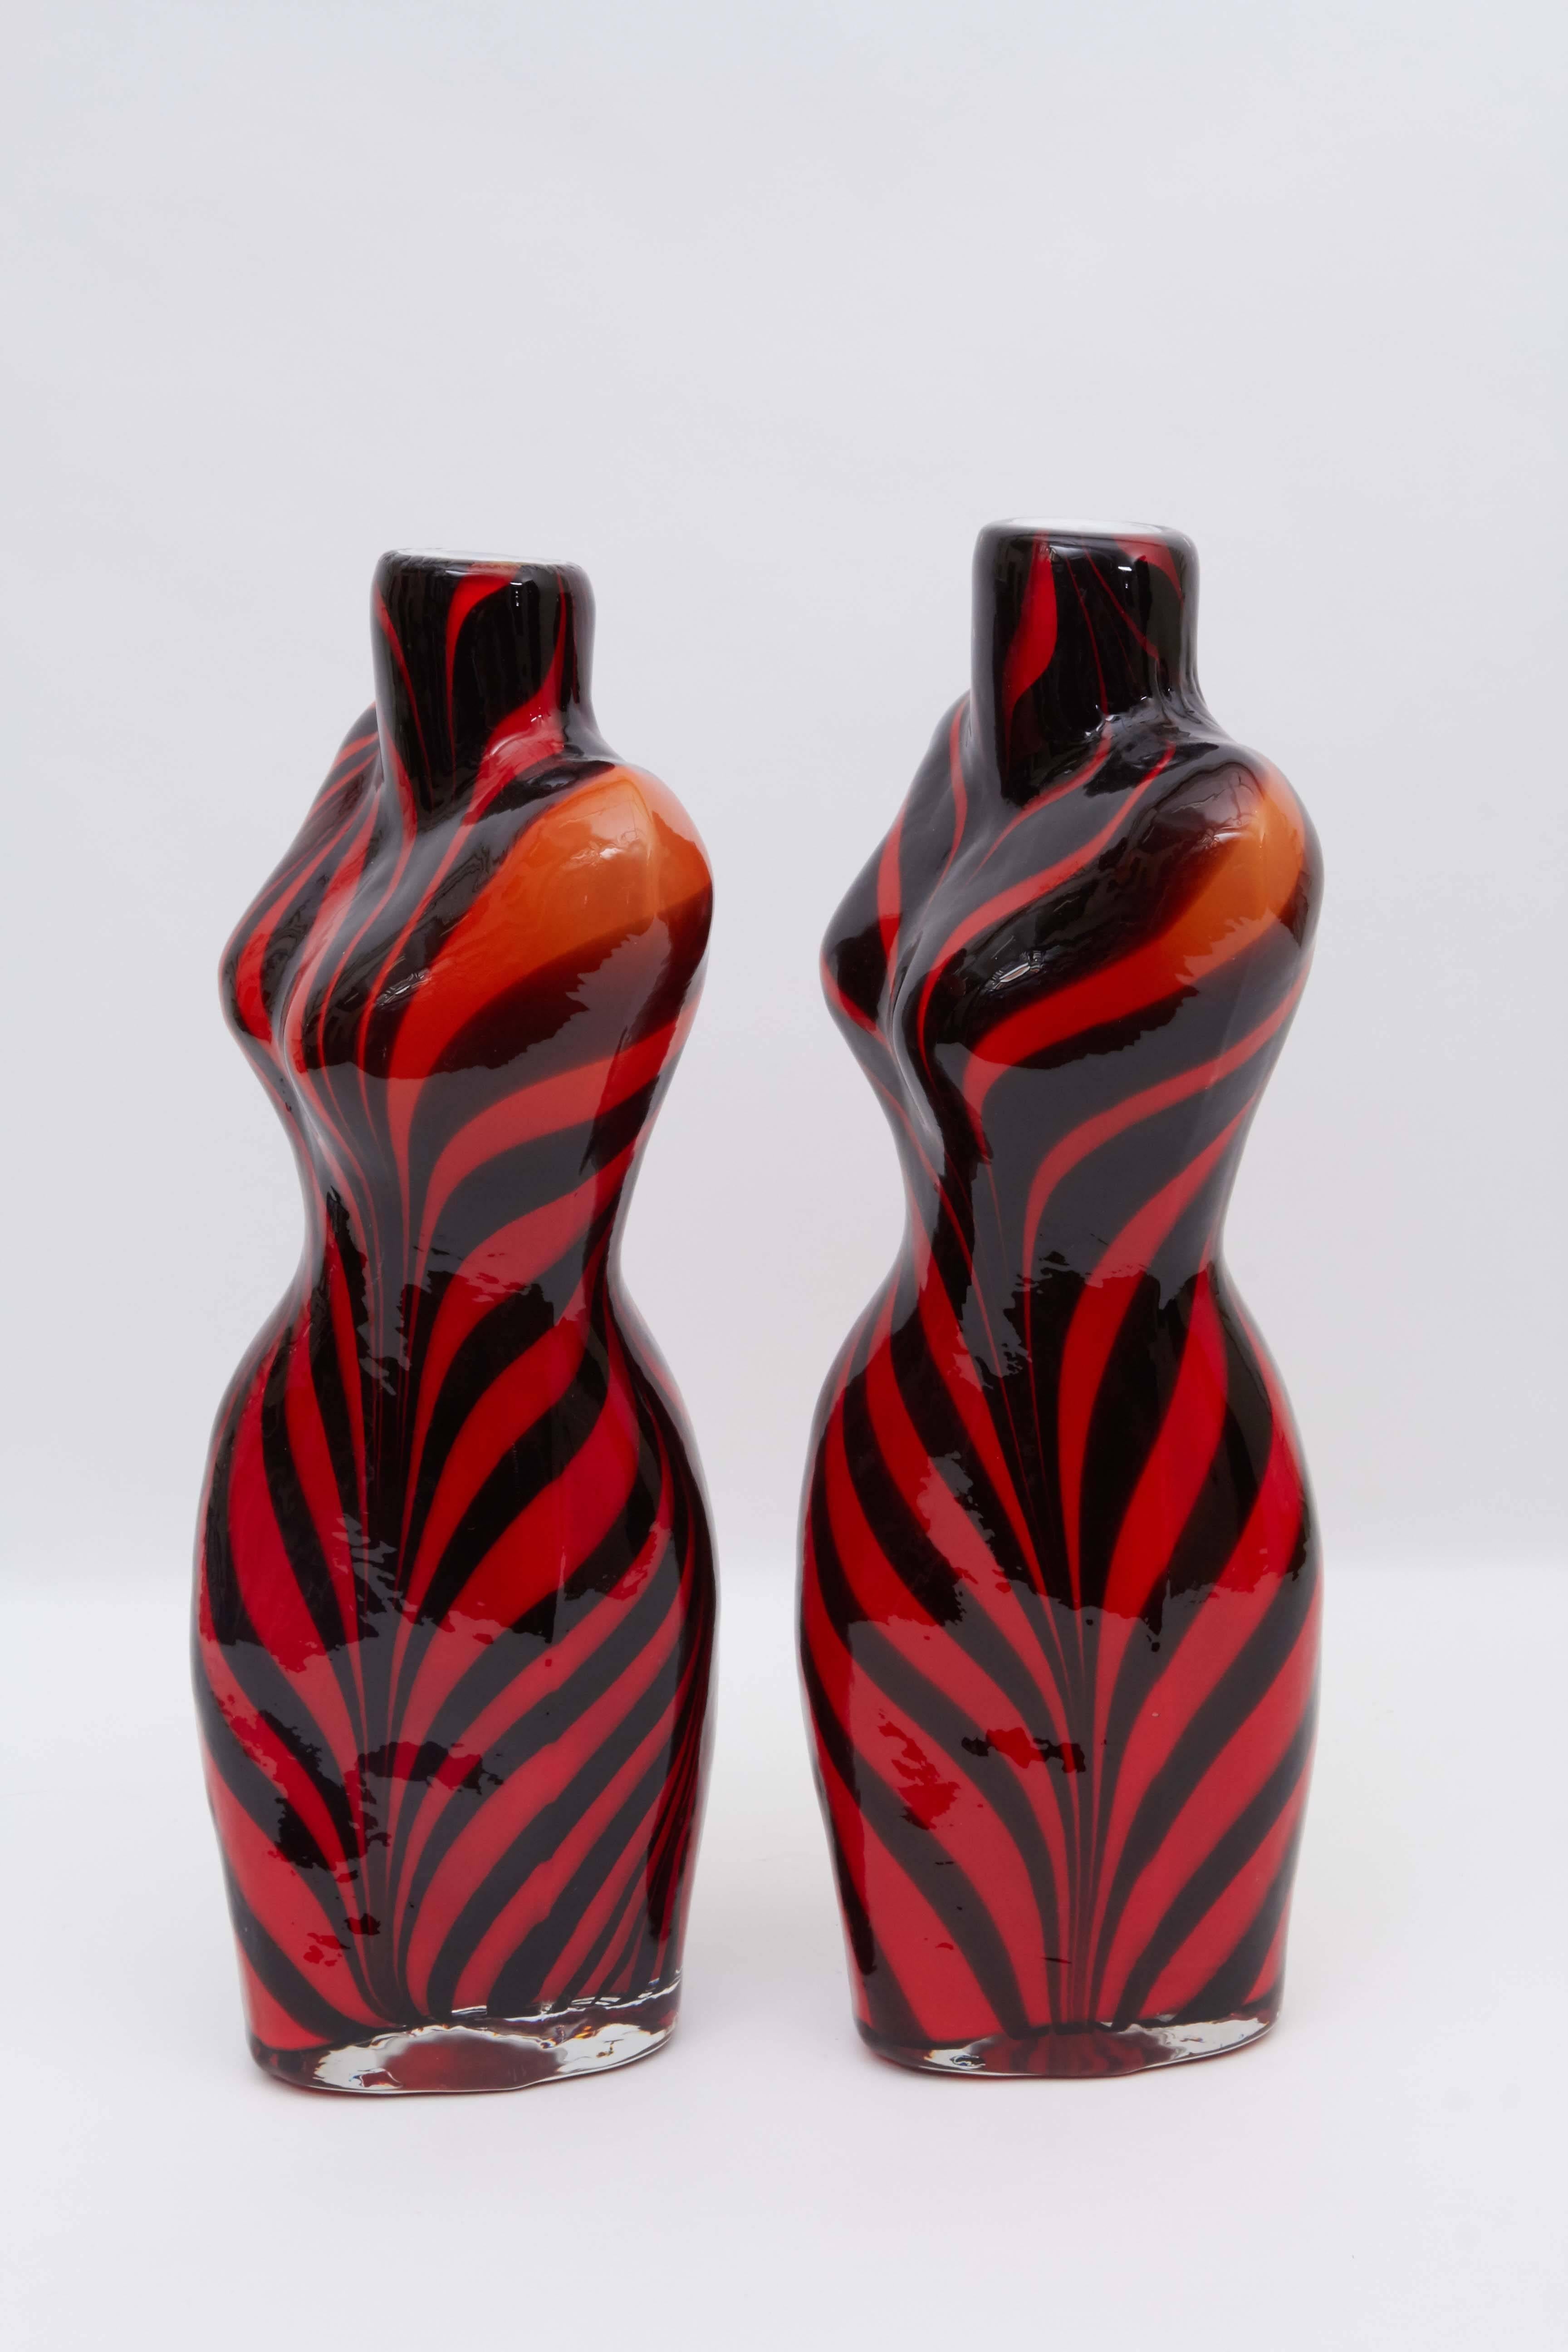 A pair of Italian, handblown Murano glass sculptural vases, produced, circa 1980s, each artfully crafted into the form of a female torso, with black and red tiger stripes, cased within a clear layer, with white interior. Very good condition, wear to